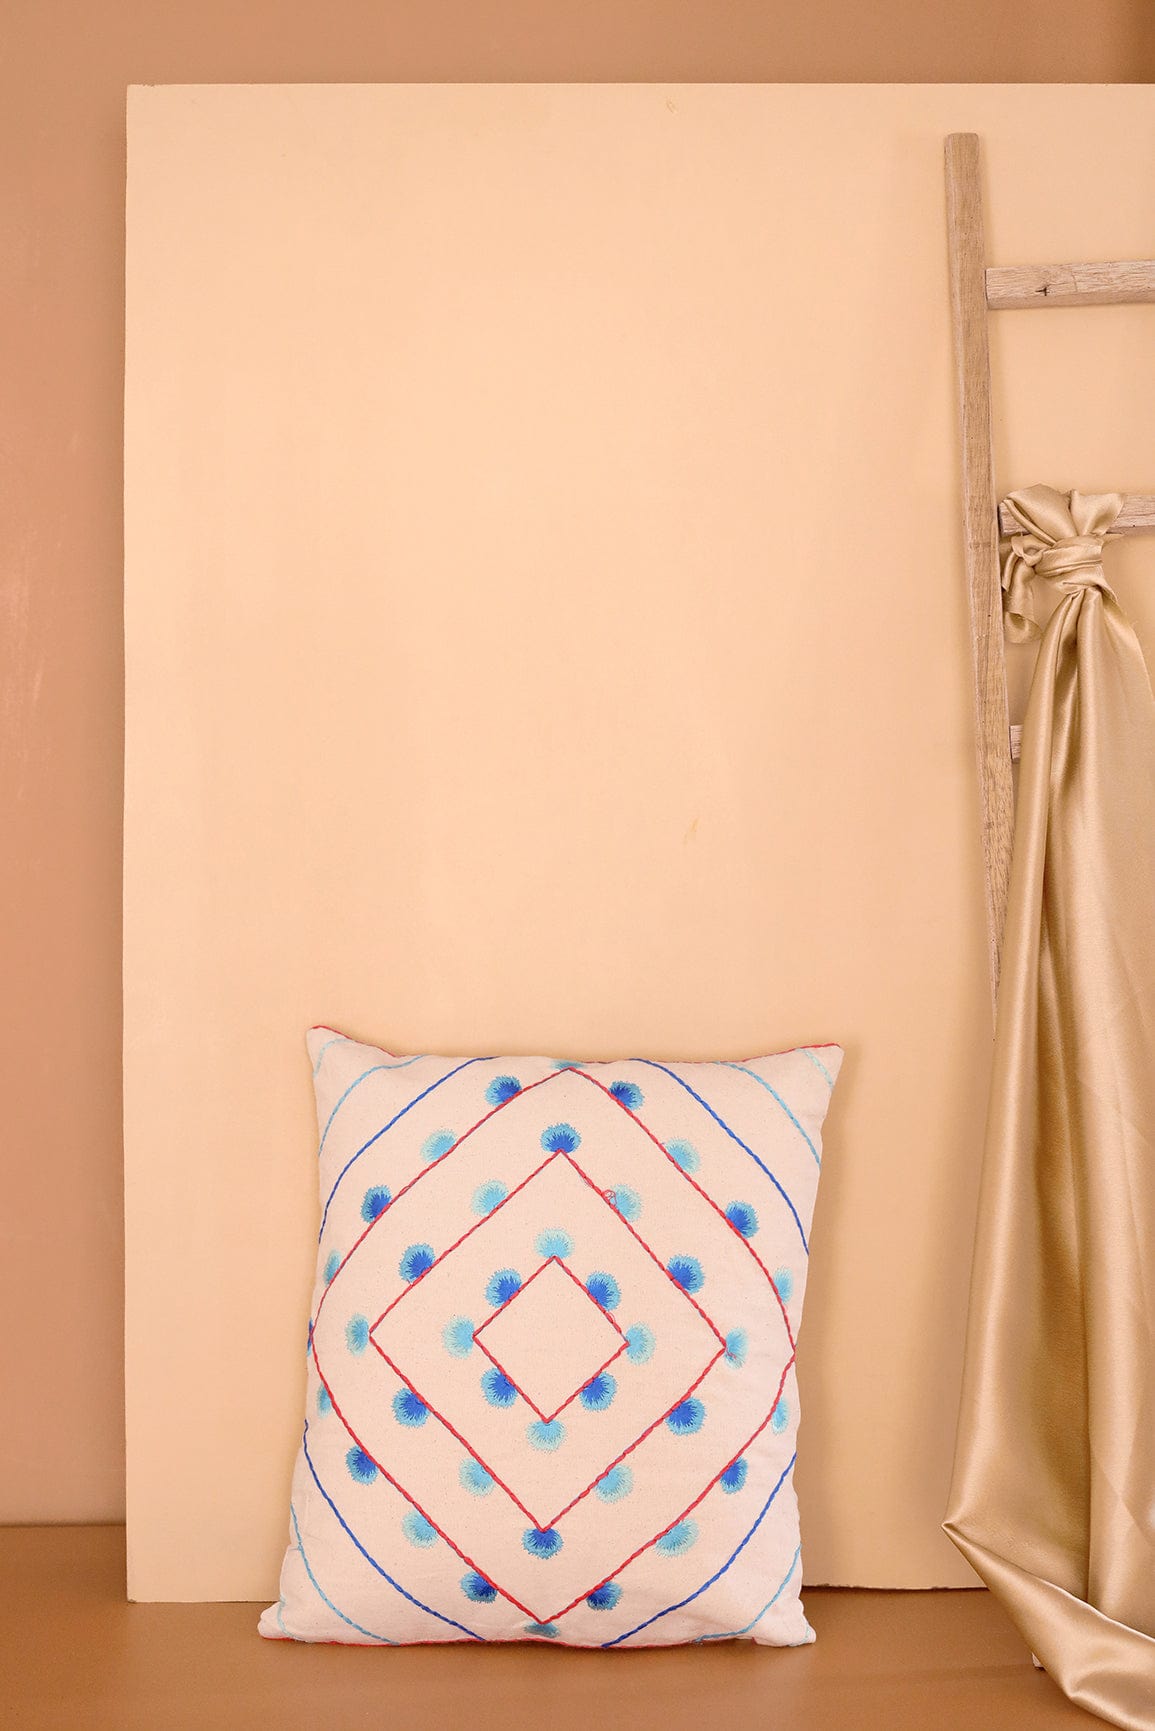 doeraa Subtle Blue Embroidery on Off White cotton Cushion Cover (16*16 inches)